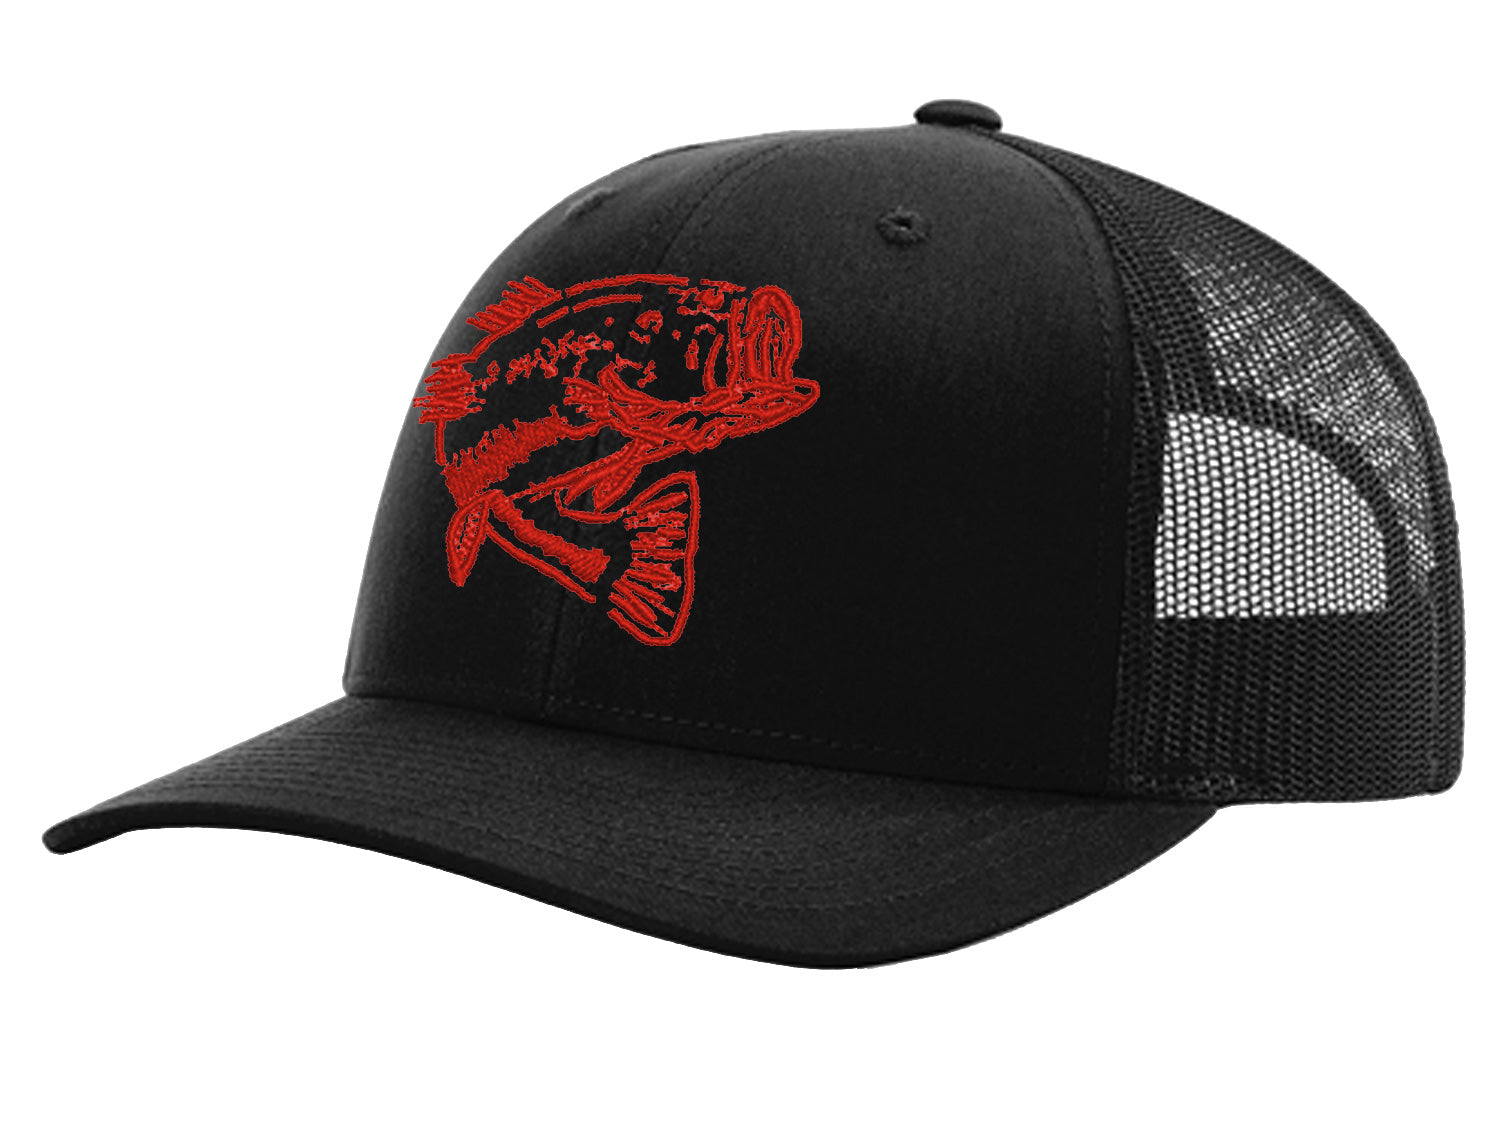 New Bass "Reel Hawg" Structured Trucker Hat - Black Solid - Red Bass logo